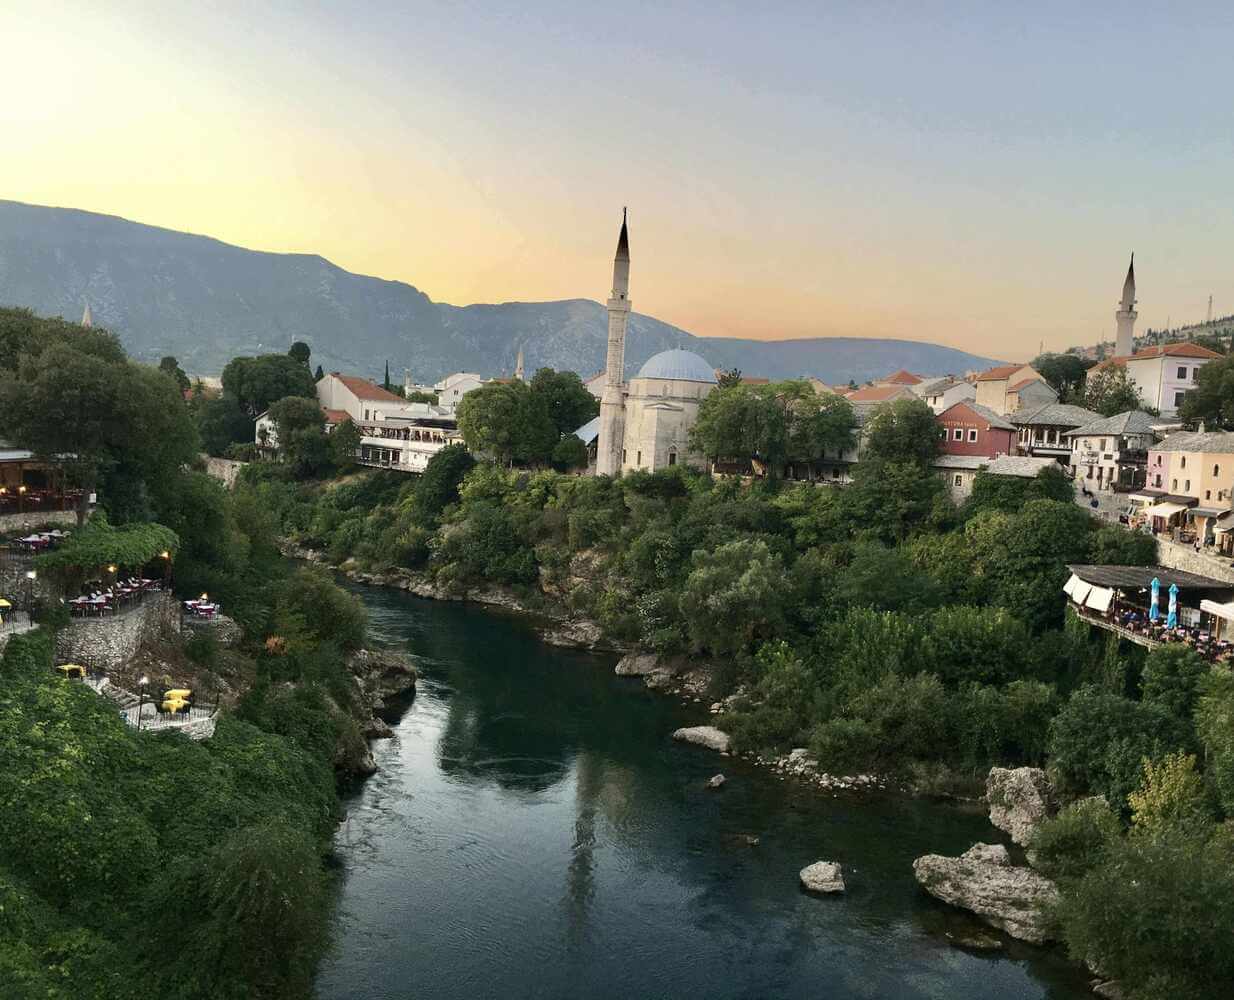 vista of mosques, river, and mountains from mostar